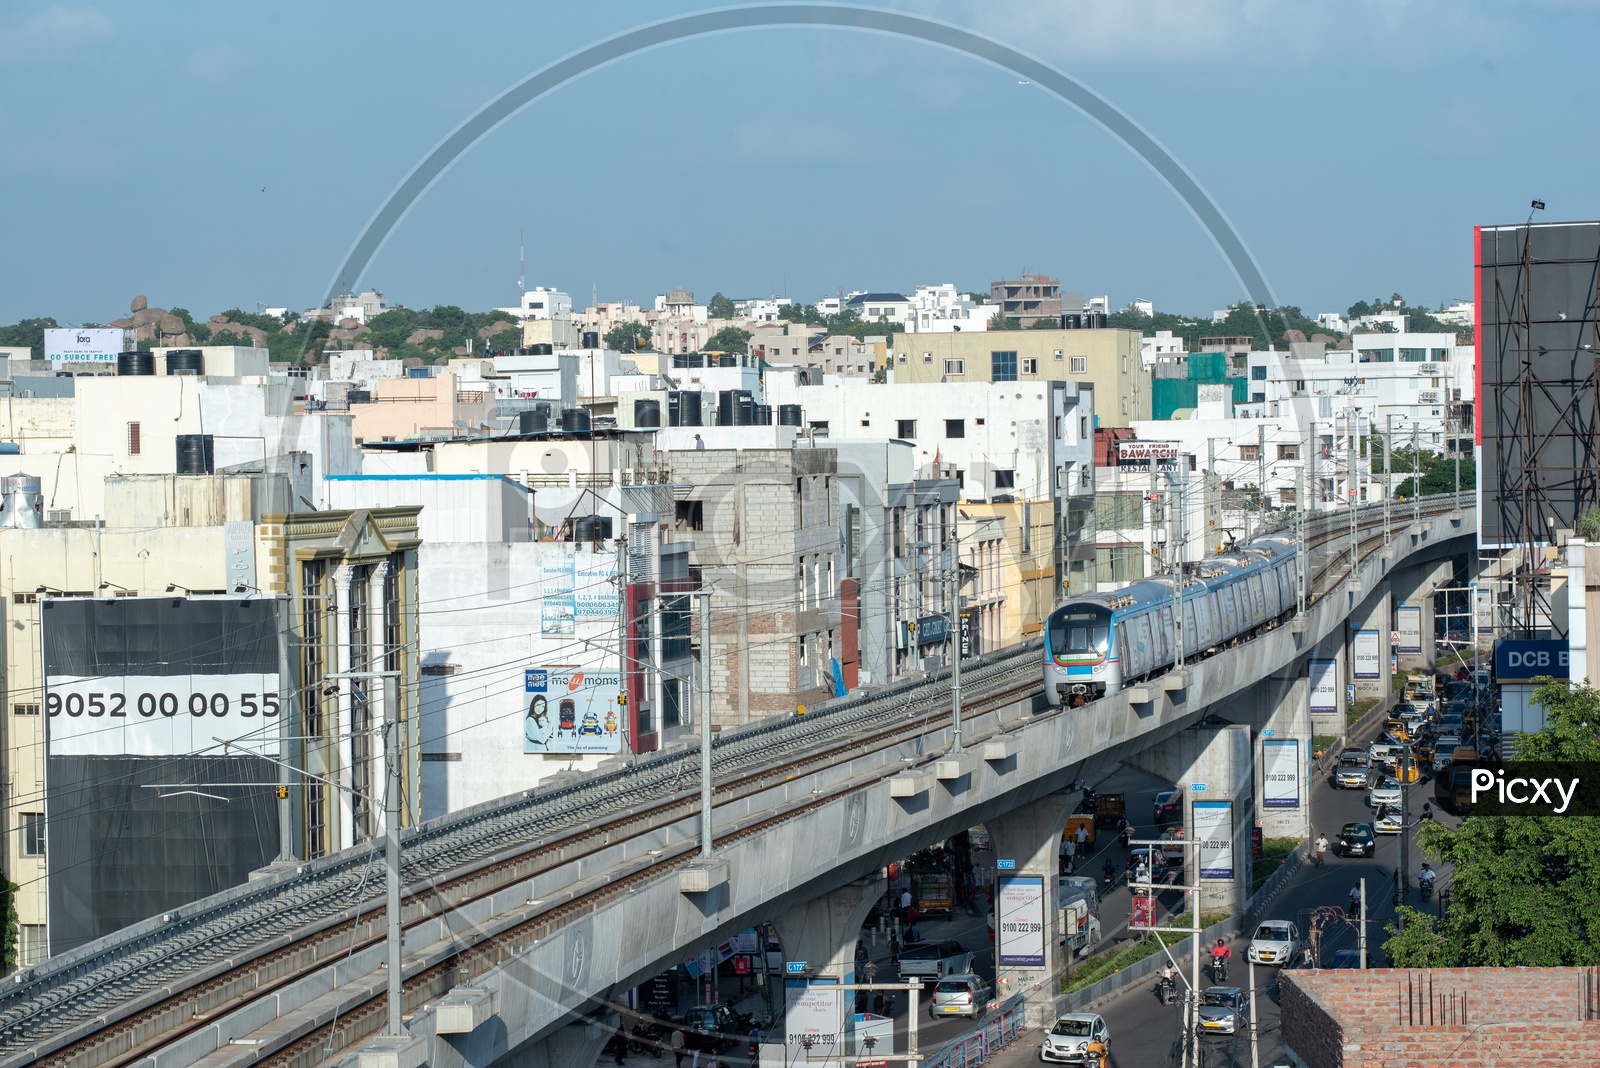 Hyderabad Metro Train running On Tracks  With High rise buildings View